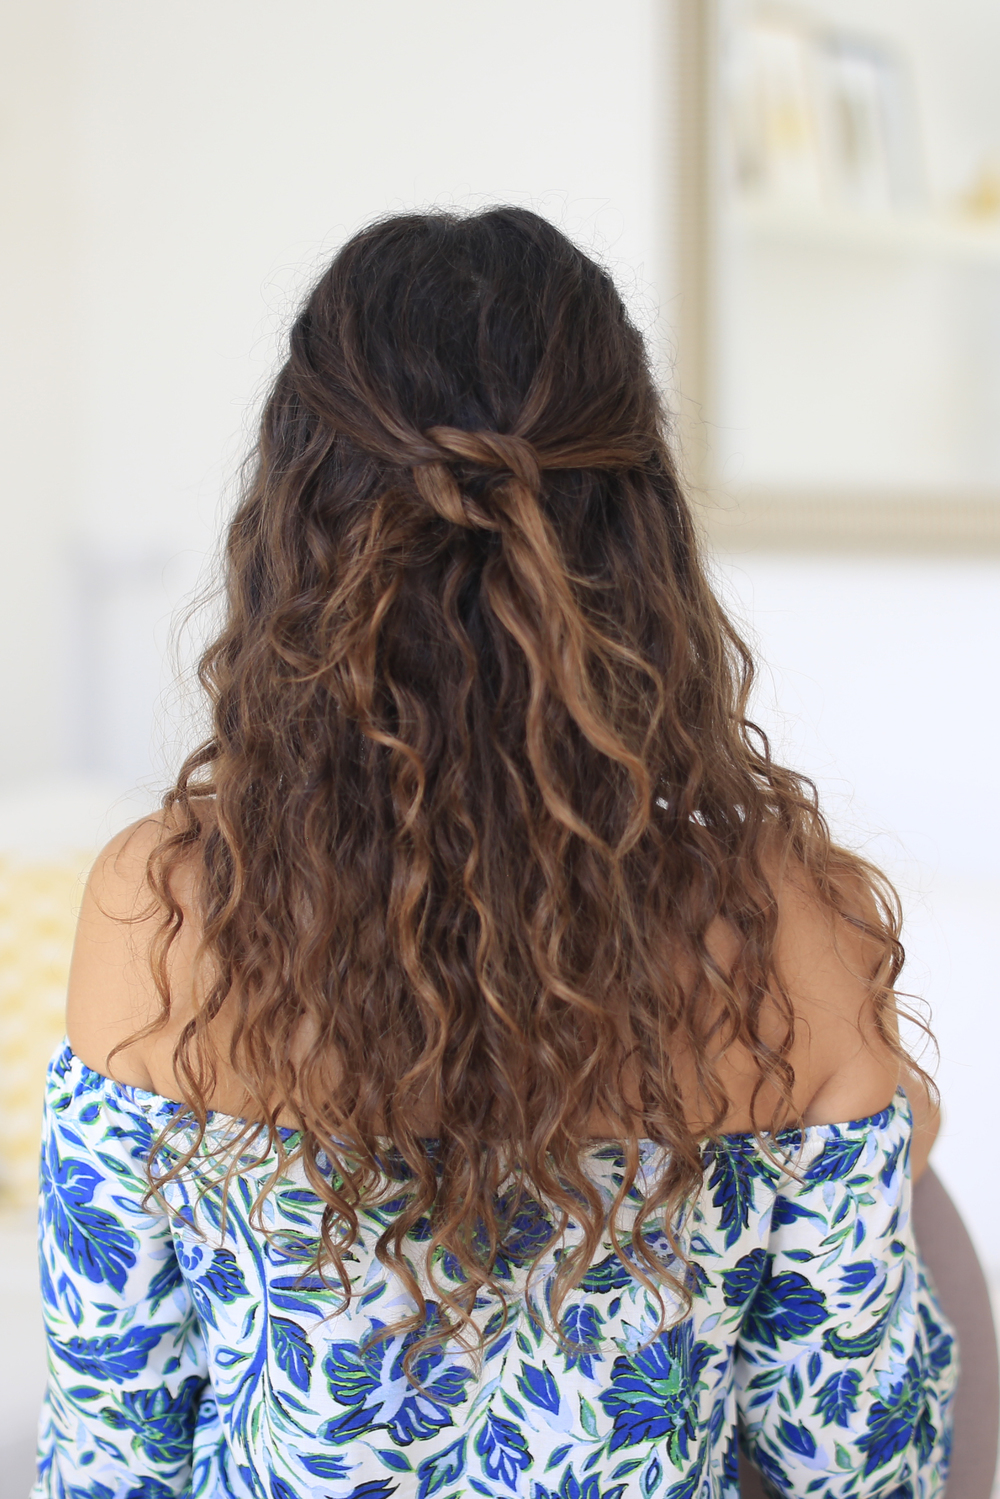 Soft curly hairstyle for this fall